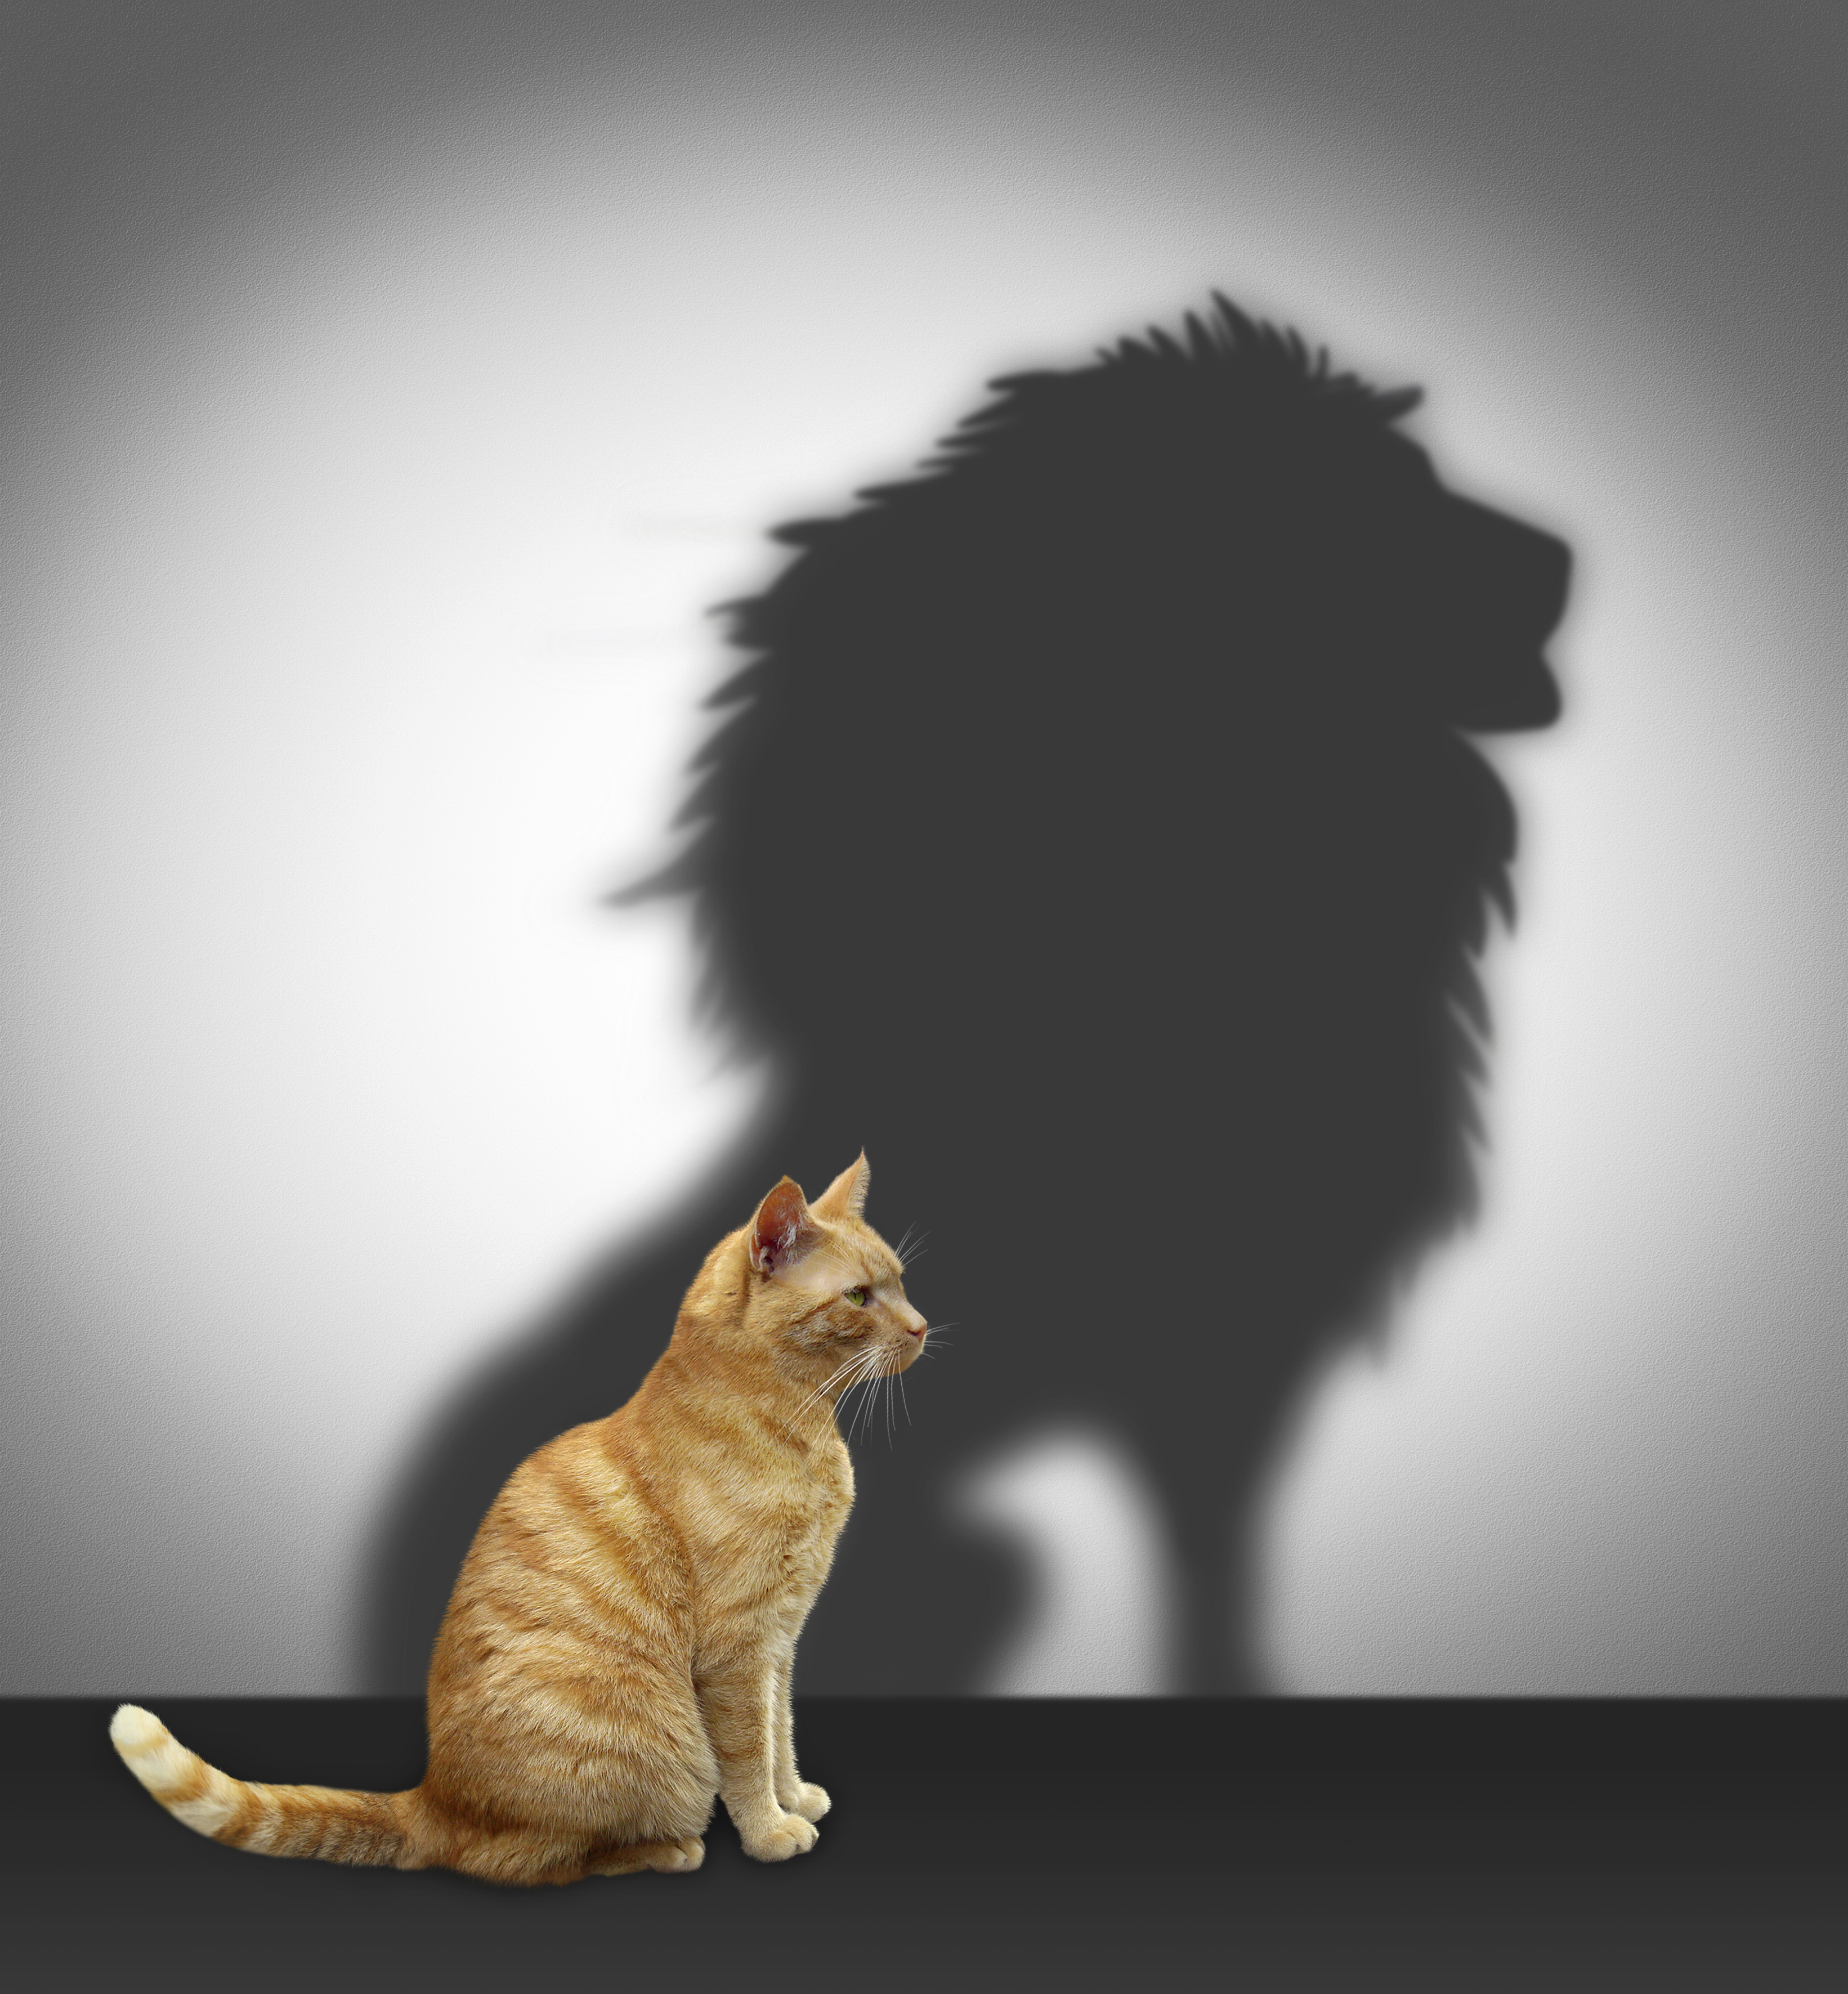 Cat stands tall and shadow forms a lion